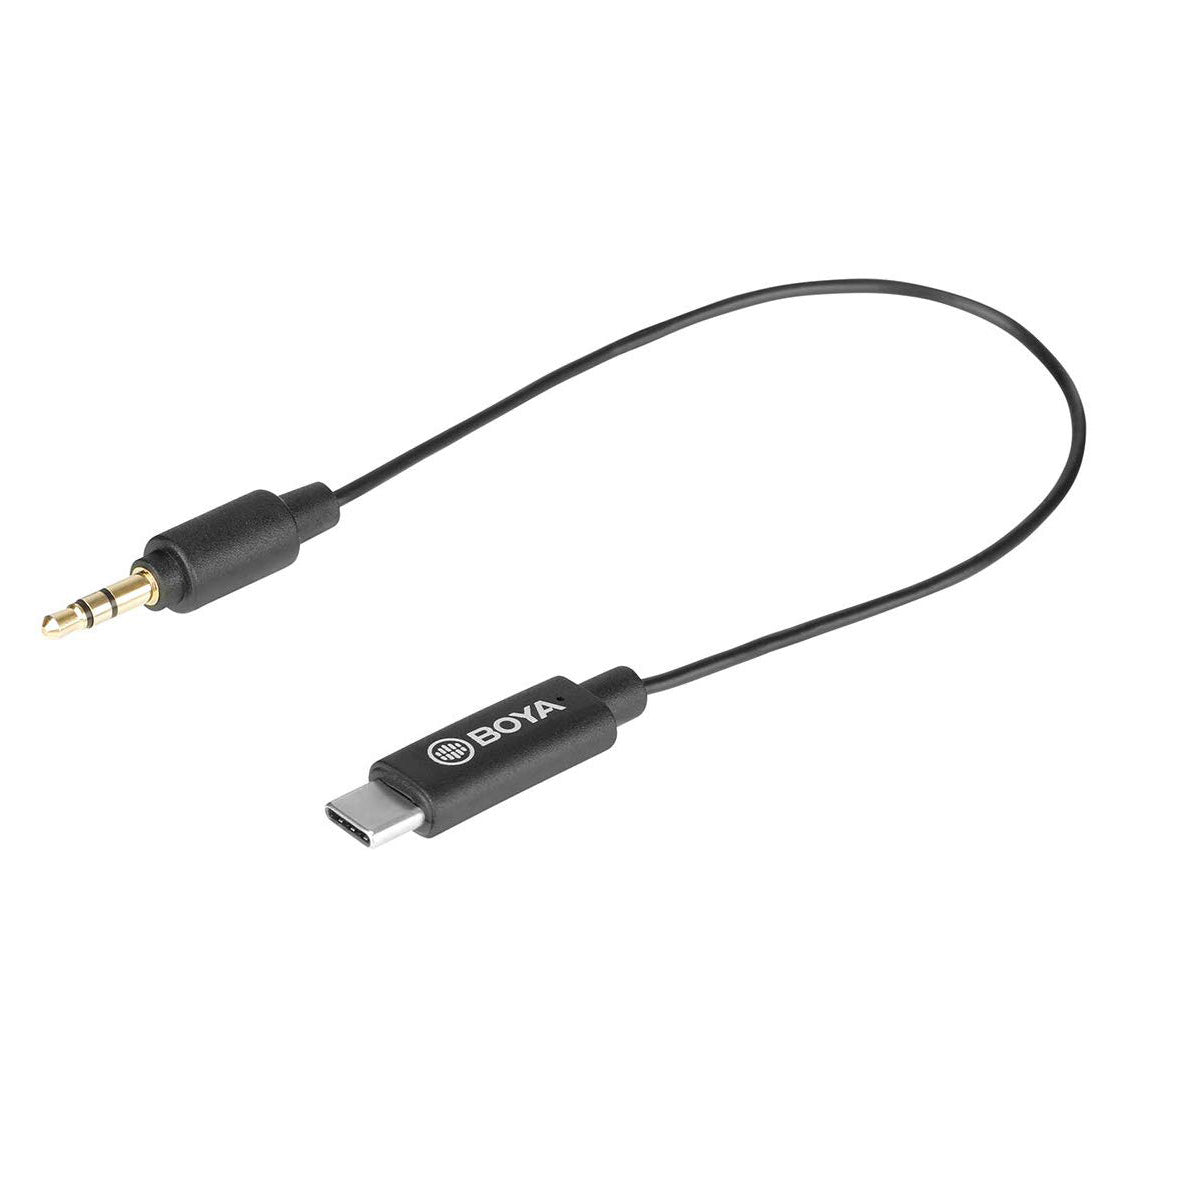 BOYA BY-K2 20cm 3.5mm Male TRRS to Male Type-C Adapter Cable